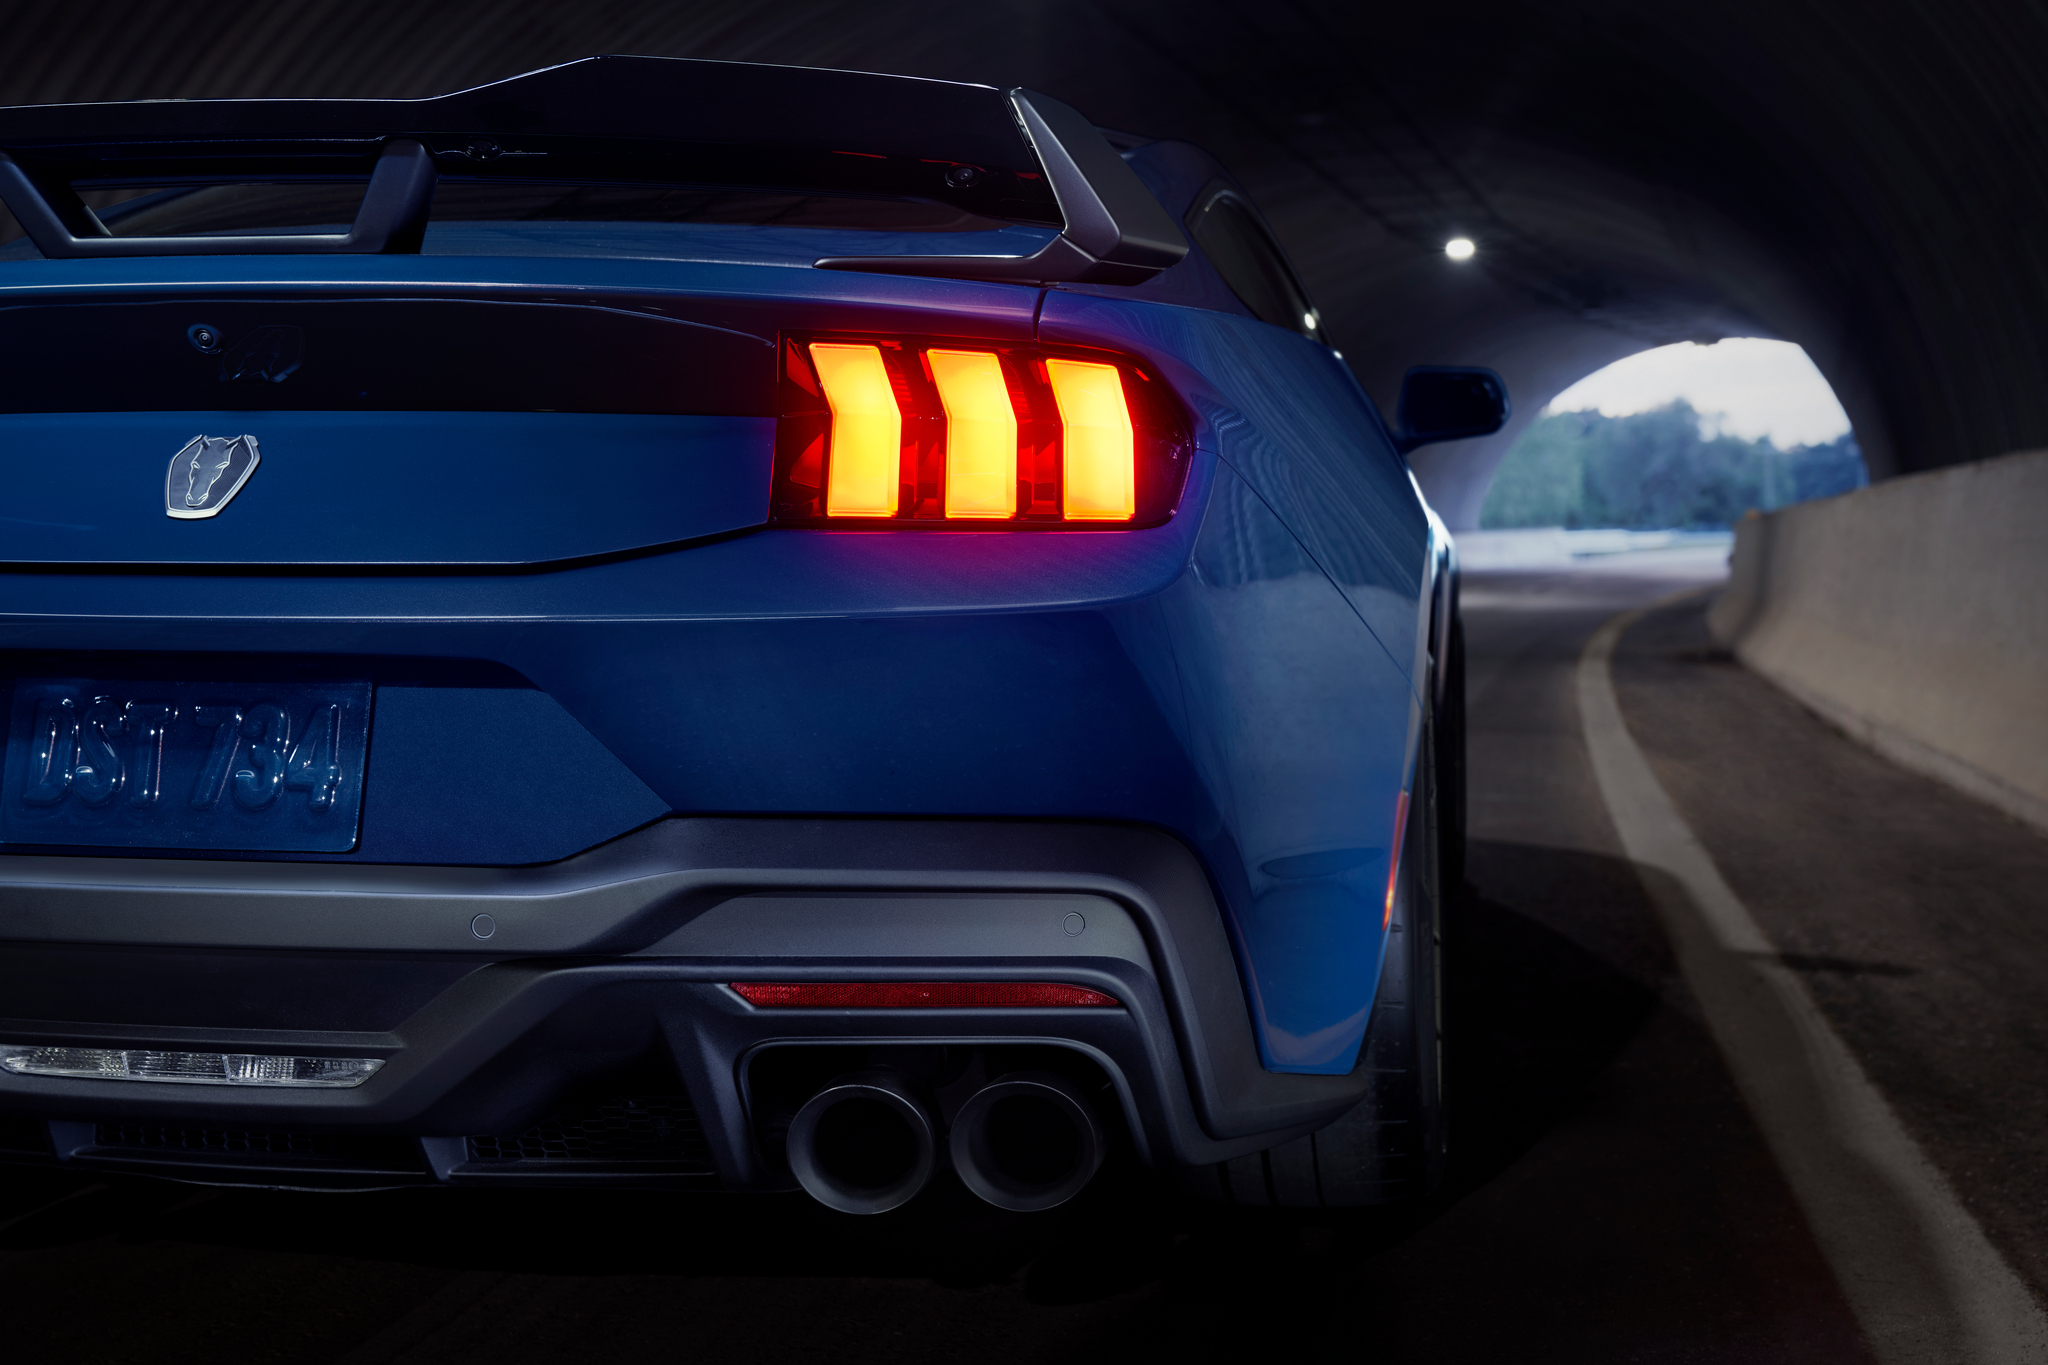 rear view rear end view with spoiler of mustang dark horse in tunnel